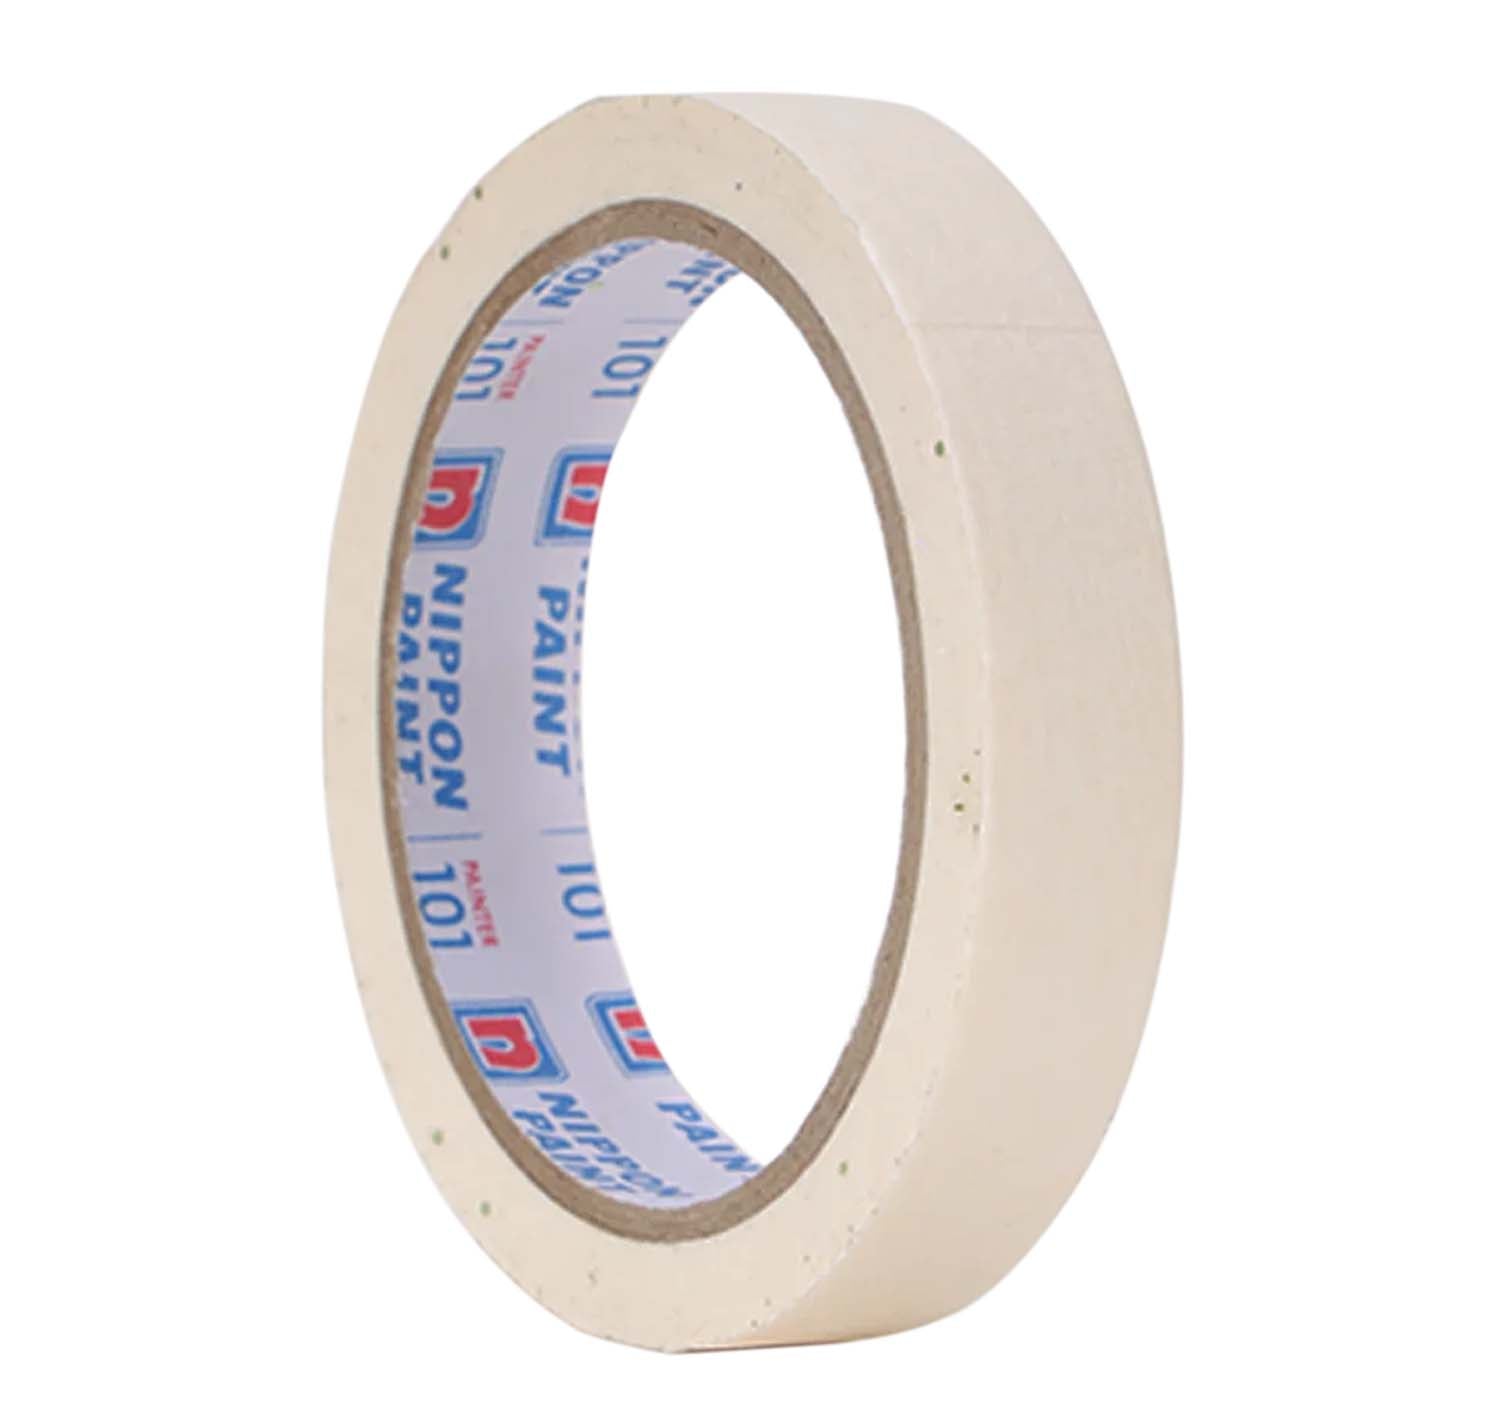 Nippon Paint Adhesive Paper Masking Tape For Painters And Carpenters - 40 Meter